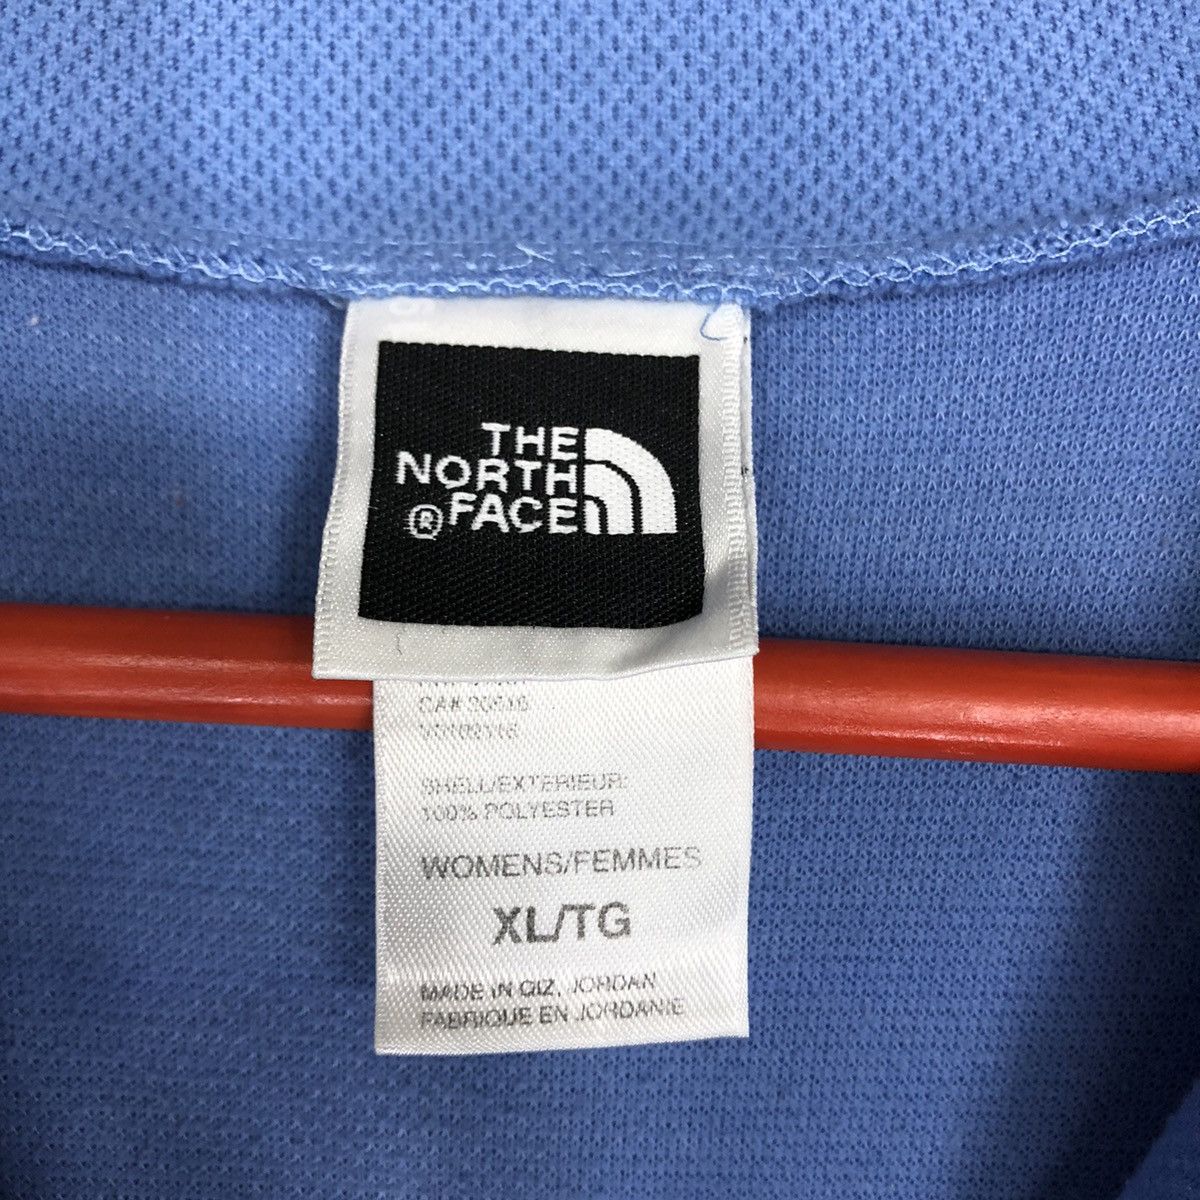 The North Face Sweater Women - 7